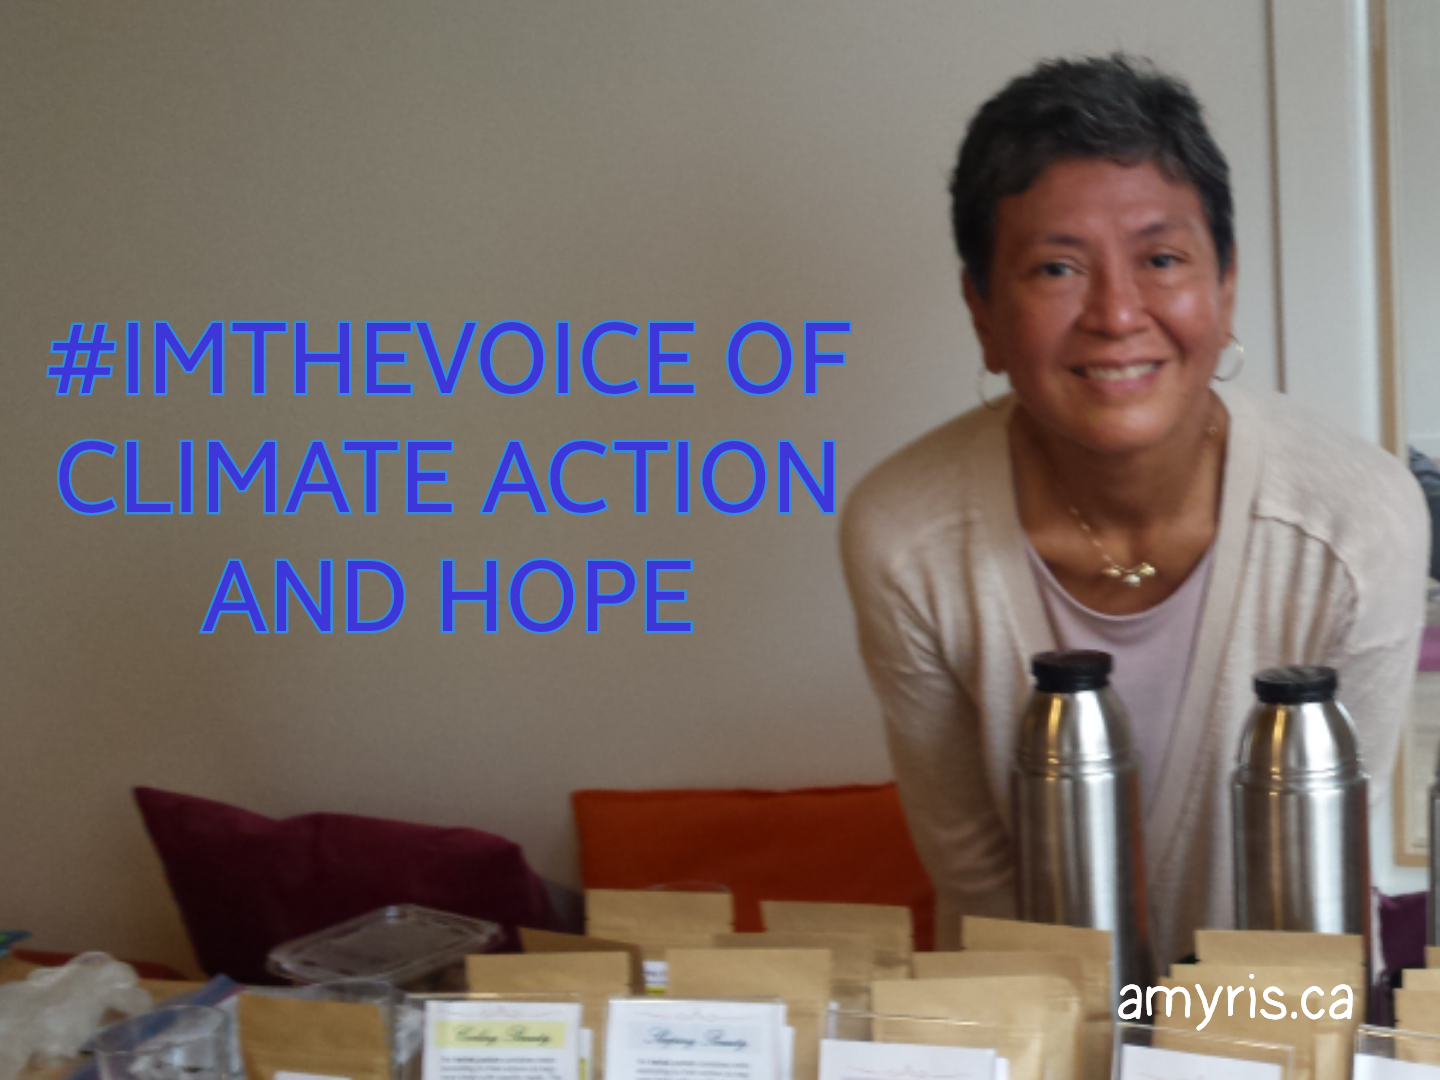 I am the voice of climate change and hope